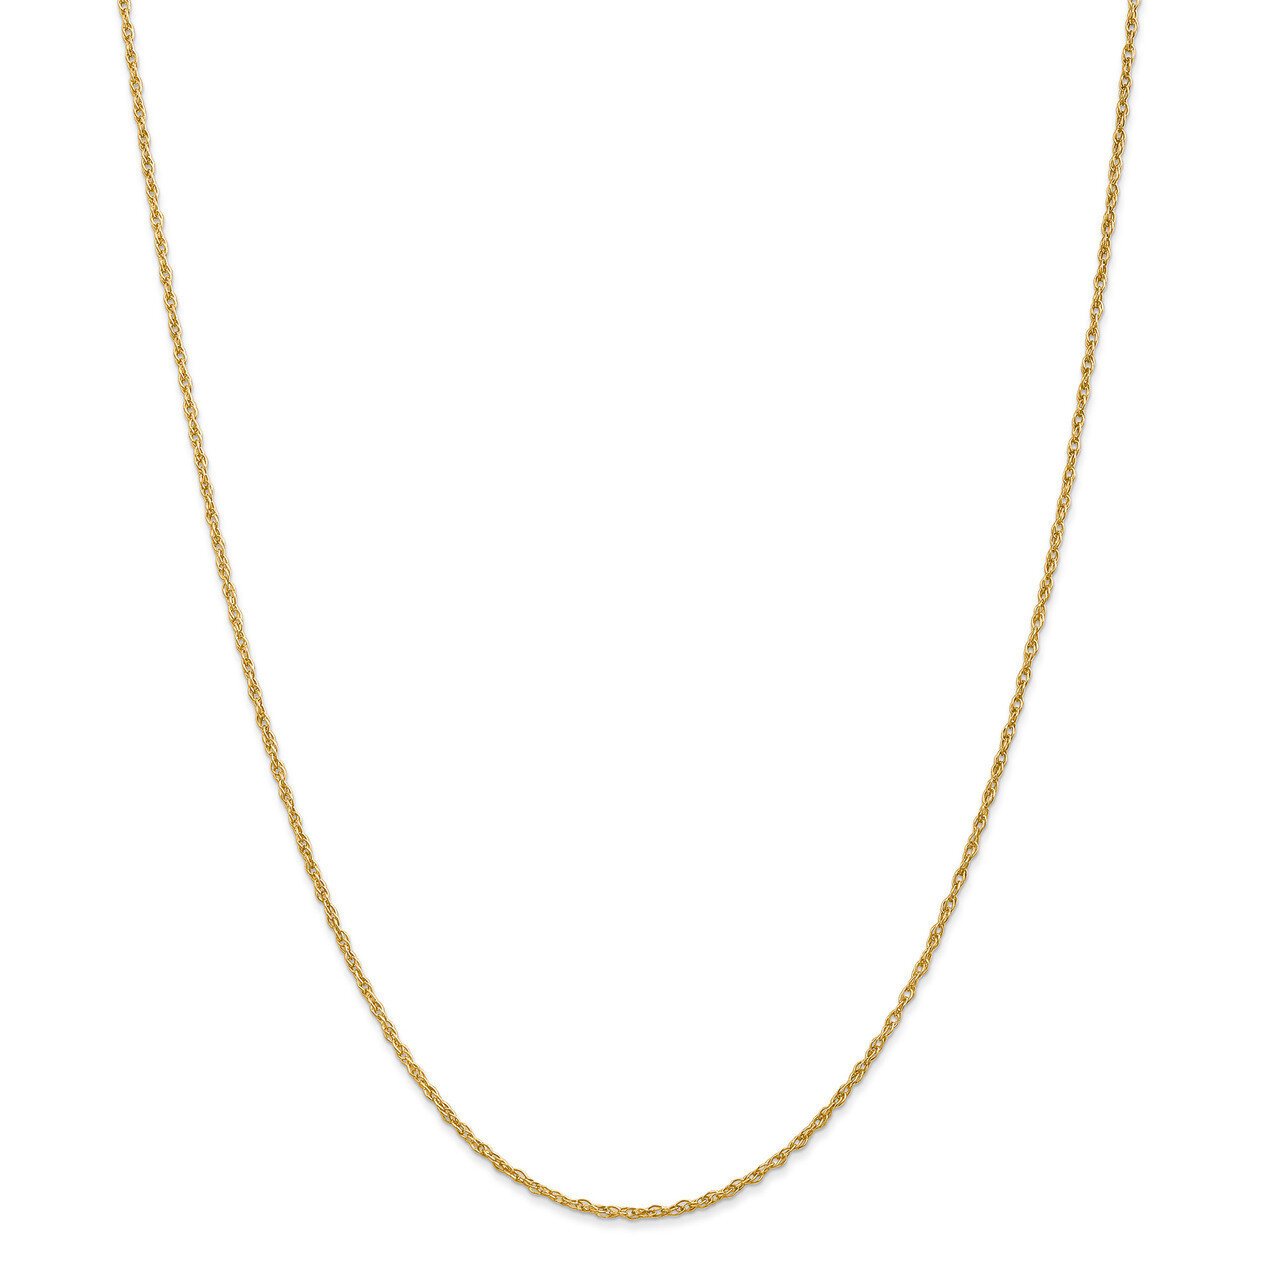 1.3mm Heavy-Baby Rope Chain 18 Inch 18k Gold HB-18LP10-18